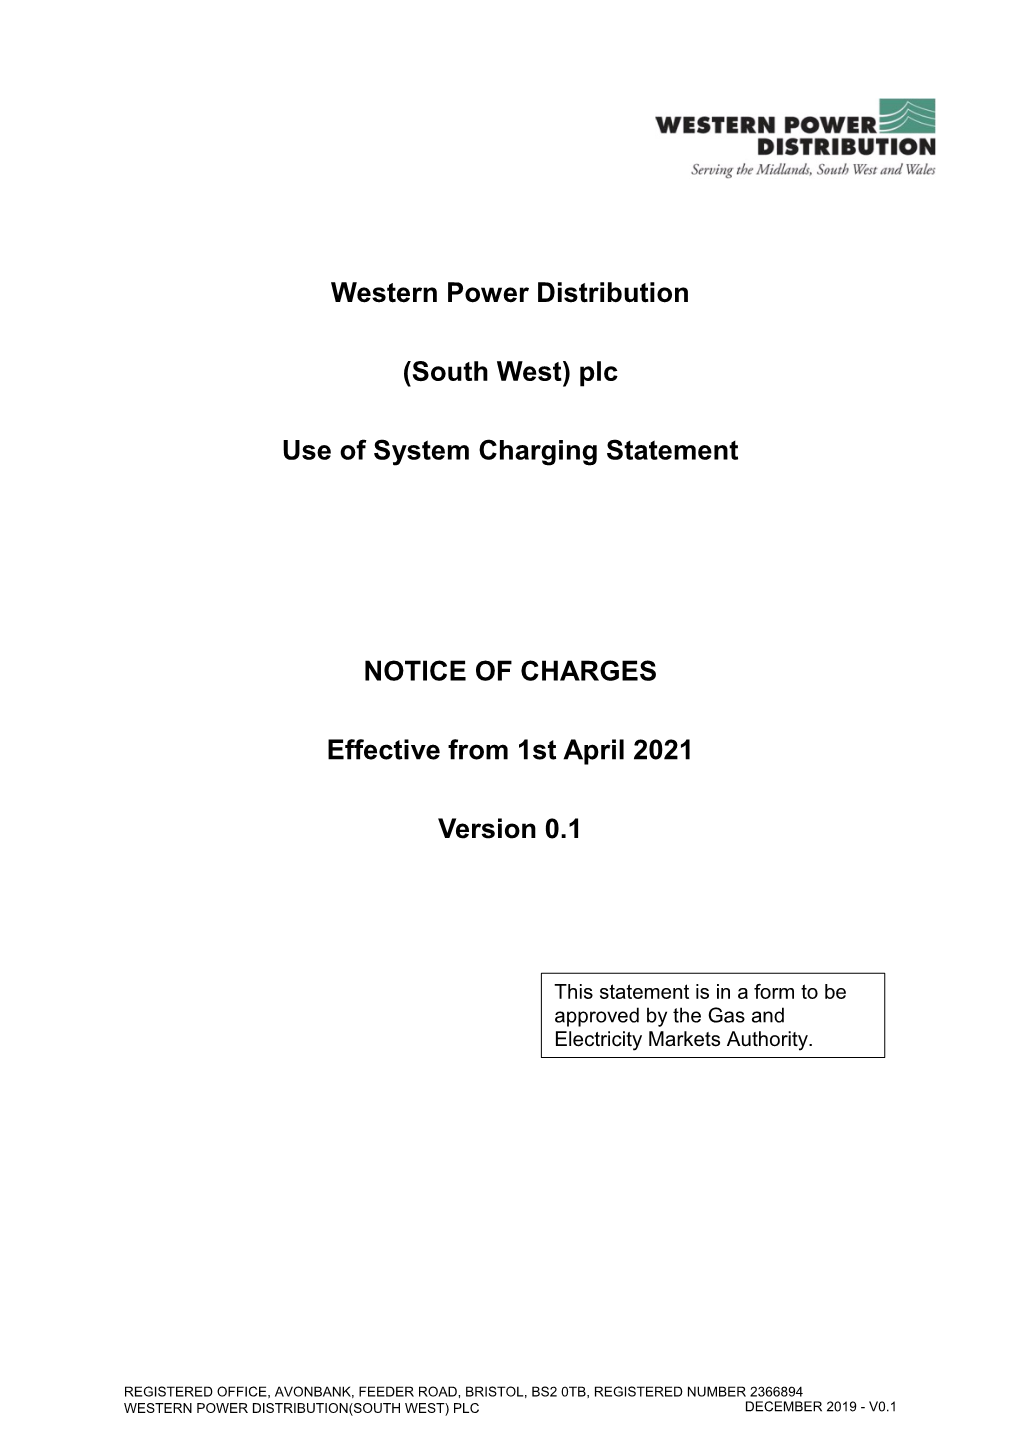 Western Power Distribution (South West) Plc Use of System Charging